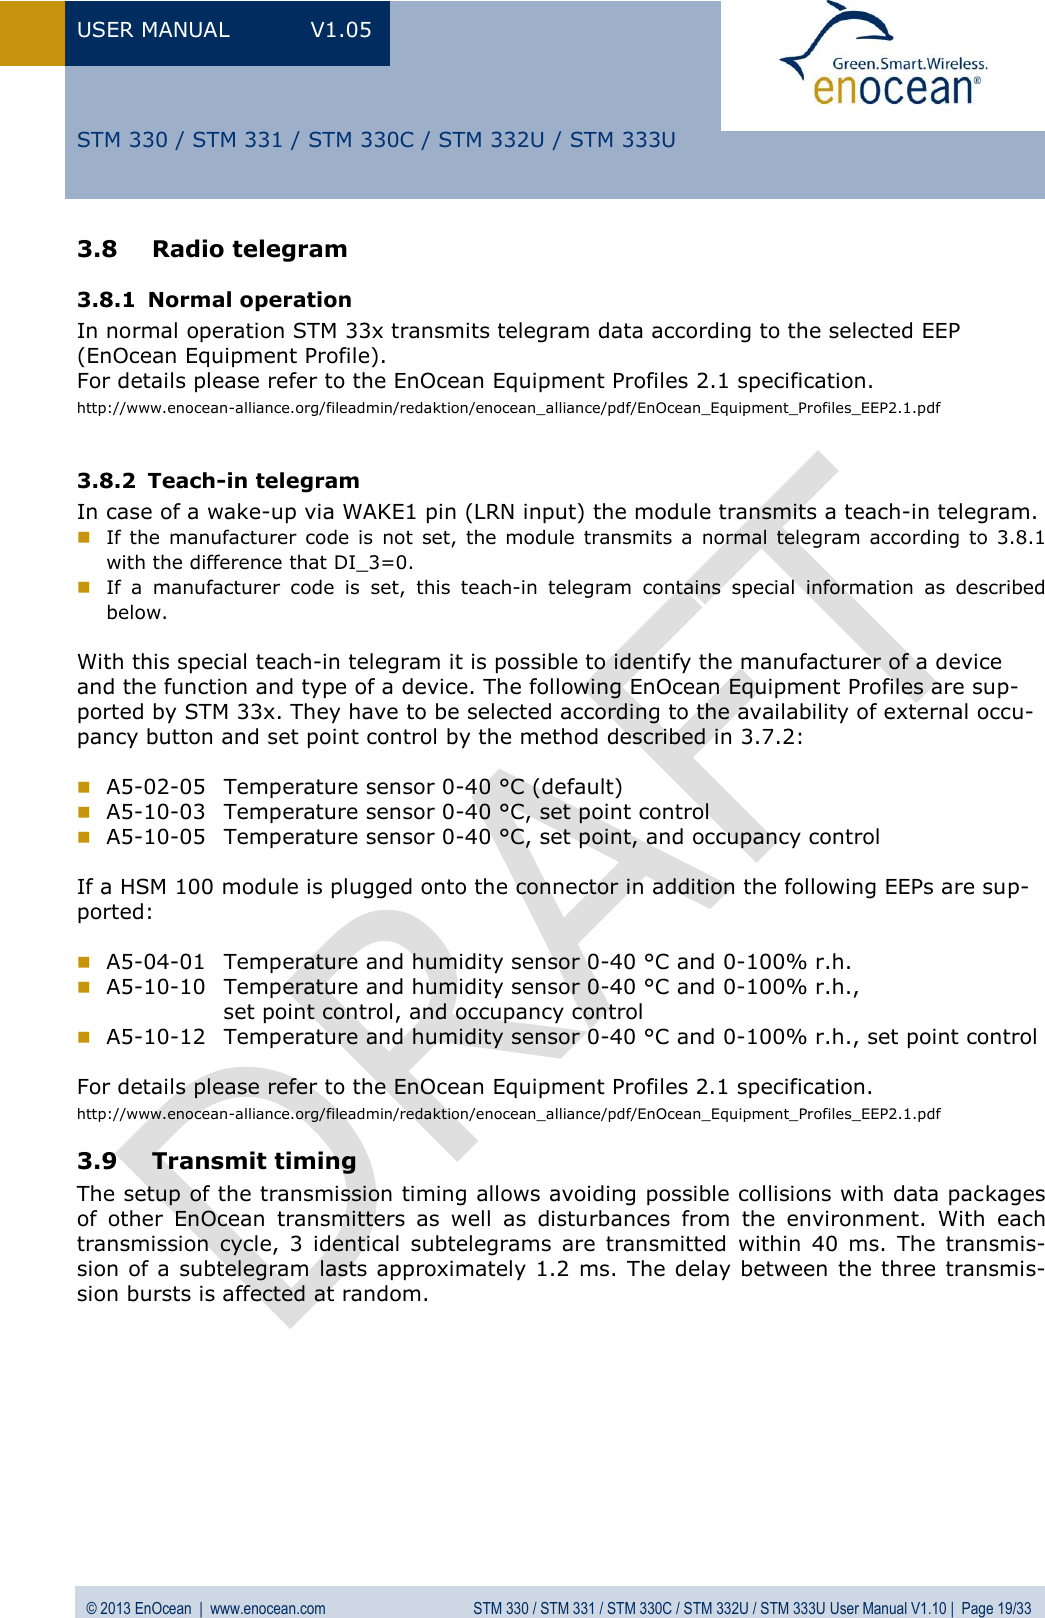 USER MANUAL  V1.05  © 2013 EnOcean  |  www.enocean.com  STM 330 / STM 331 / STM 330C / STM 332U / STM 333U User Manual V1.10 |  Page 19/33   STM 330 / STM 331 / STM 330C / STM 332U / STM 333U 3.8 Radio telegram 3.8.1 Normal operation In normal operation STM 33x transmits telegram data according to the selected EEP  (EnOcean Equipment Profile). For details please refer to the EnOcean Equipment Profiles 2.1 specification. http://www.enocean-alliance.org/fileadmin/redaktion/enocean_alliance/pdf/EnOcean_Equipment_Profiles_EEP2.1.pdf  3.8.2 Teach-in telegram In case of a wake-up via WAKE1 pin (LRN input) the module transmits a teach-in telegram.  If the  manufacturer code  is  not  set,  the module transmits  a  normal telegram  according to  3.8.1 with the difference that DI_3=0.  If  a  manufacturer  code  is  set,  this  teach-in  telegram  contains  special  information  as  described below.   With this special teach-in telegram it is possible to identify the manufacturer of a device and the function and type of a device. The following EnOcean Equipment Profiles are sup-ported by STM 33x. They have to be selected according to the availability of external occu-pancy button and set point control by the method described in 3.7.2:   A5-02-05  Temperature sensor 0-40 °C (default)  A5-10-03  Temperature sensor 0-40 °C, set point control  A5-10-05  Temperature sensor 0-40 °C, set point, and occupancy control  If a HSM 100 module is plugged onto the connector in addition the following EEPs are sup-ported:   A5-04-01  Temperature and humidity sensor 0-40 °C and 0-100% r.h.  A5-10-10  Temperature and humidity sensor 0-40 °C and 0-100% r.h.,                  set point control, and occupancy control  A5-10-12  Temperature and humidity sensor 0-40 °C and 0-100% r.h., set point control  For details please refer to the EnOcean Equipment Profiles 2.1 specification. http://www.enocean-alliance.org/fileadmin/redaktion/enocean_alliance/pdf/EnOcean_Equipment_Profiles_EEP2.1.pdf 3.9 Transmit timing  The setup of the transmission timing allows avoiding possible collisions with data packages of  other  EnOcean  transmitters  as  well  as  disturbances  from  the  environment.  With  each transmission  cycle,  3  identical  subtelegrams  are  transmitted  within  40  ms.  The  transmis-sion of a subtelegram lasts approximately 1.2 ms. The delay between the three transmis-sion bursts is affected at random.          